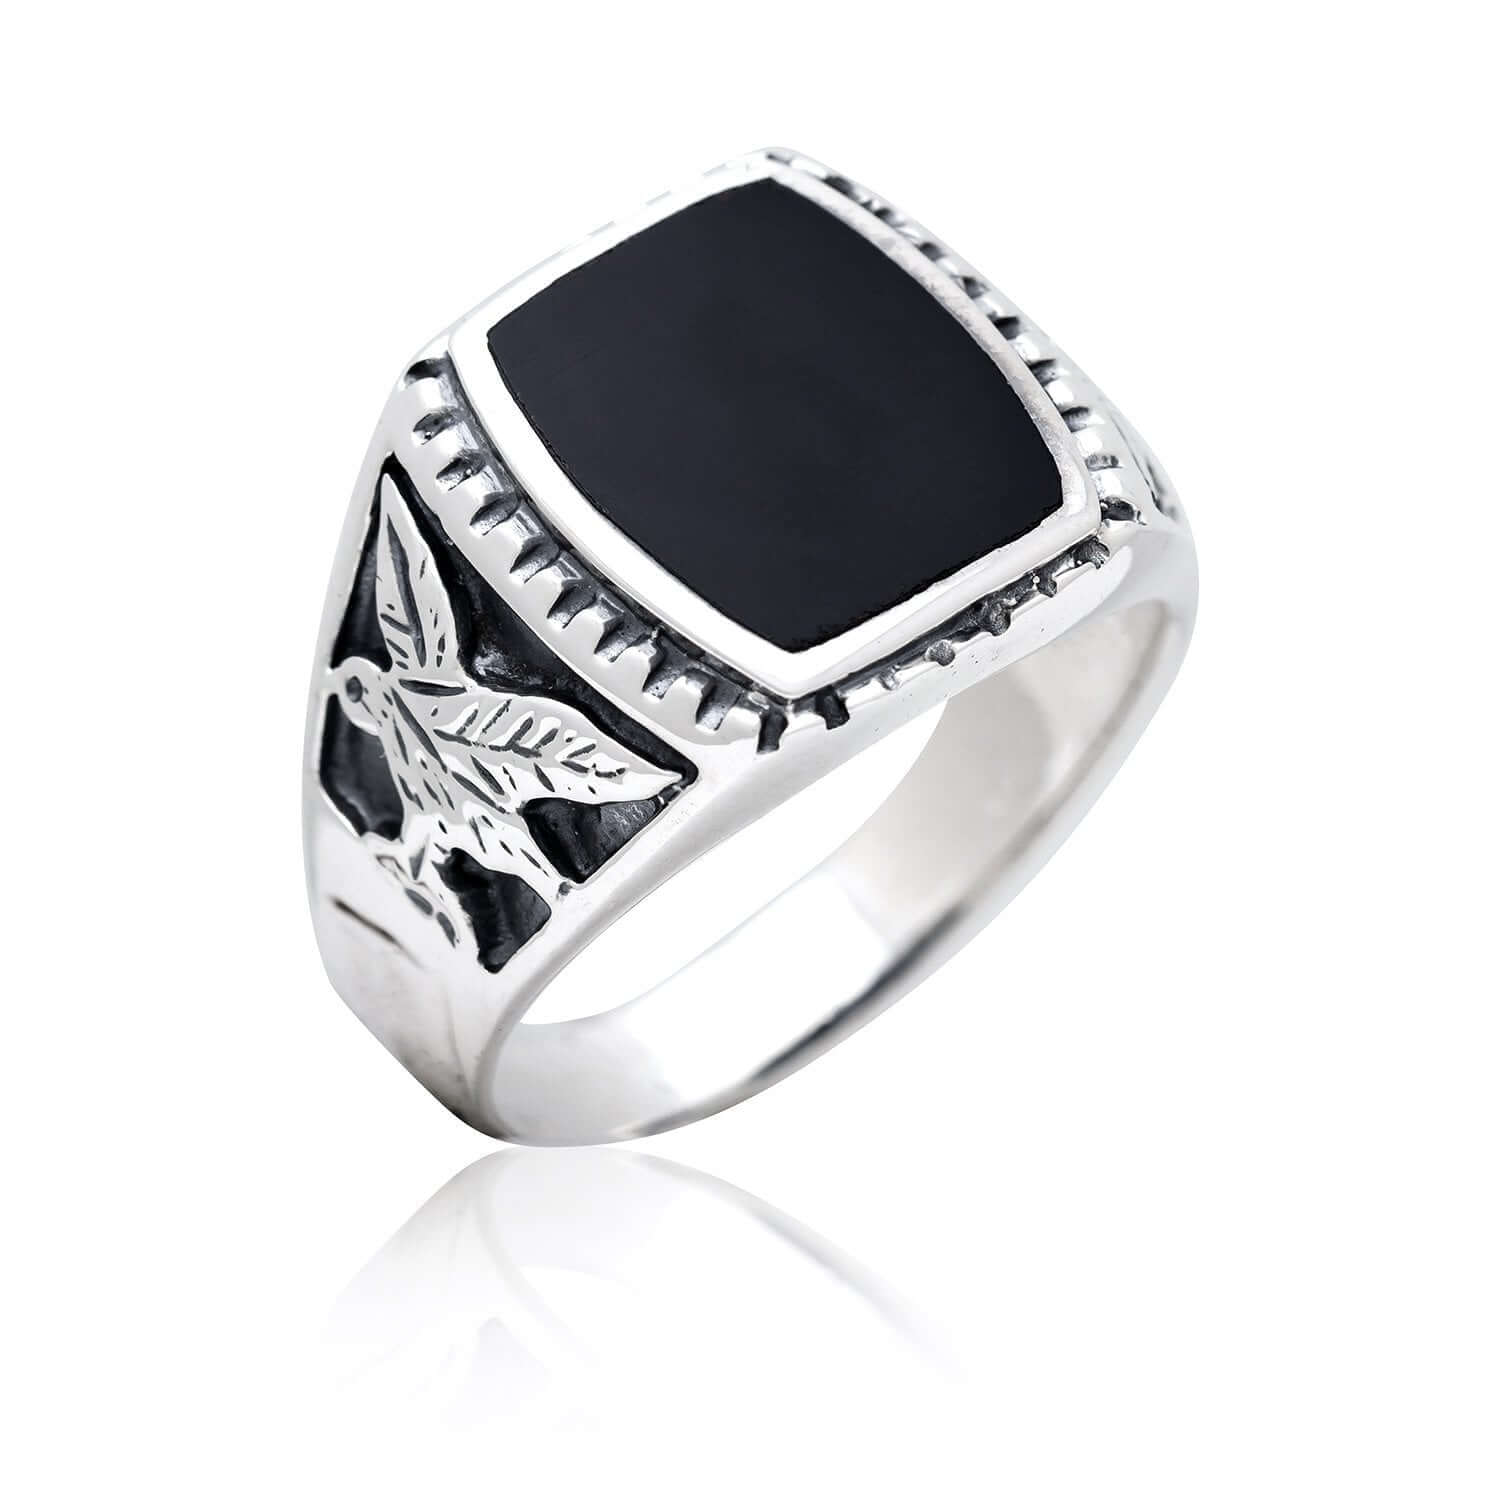 Mens Genuine Black Onyx Sterling Silver Fashion Ring - JCPenney